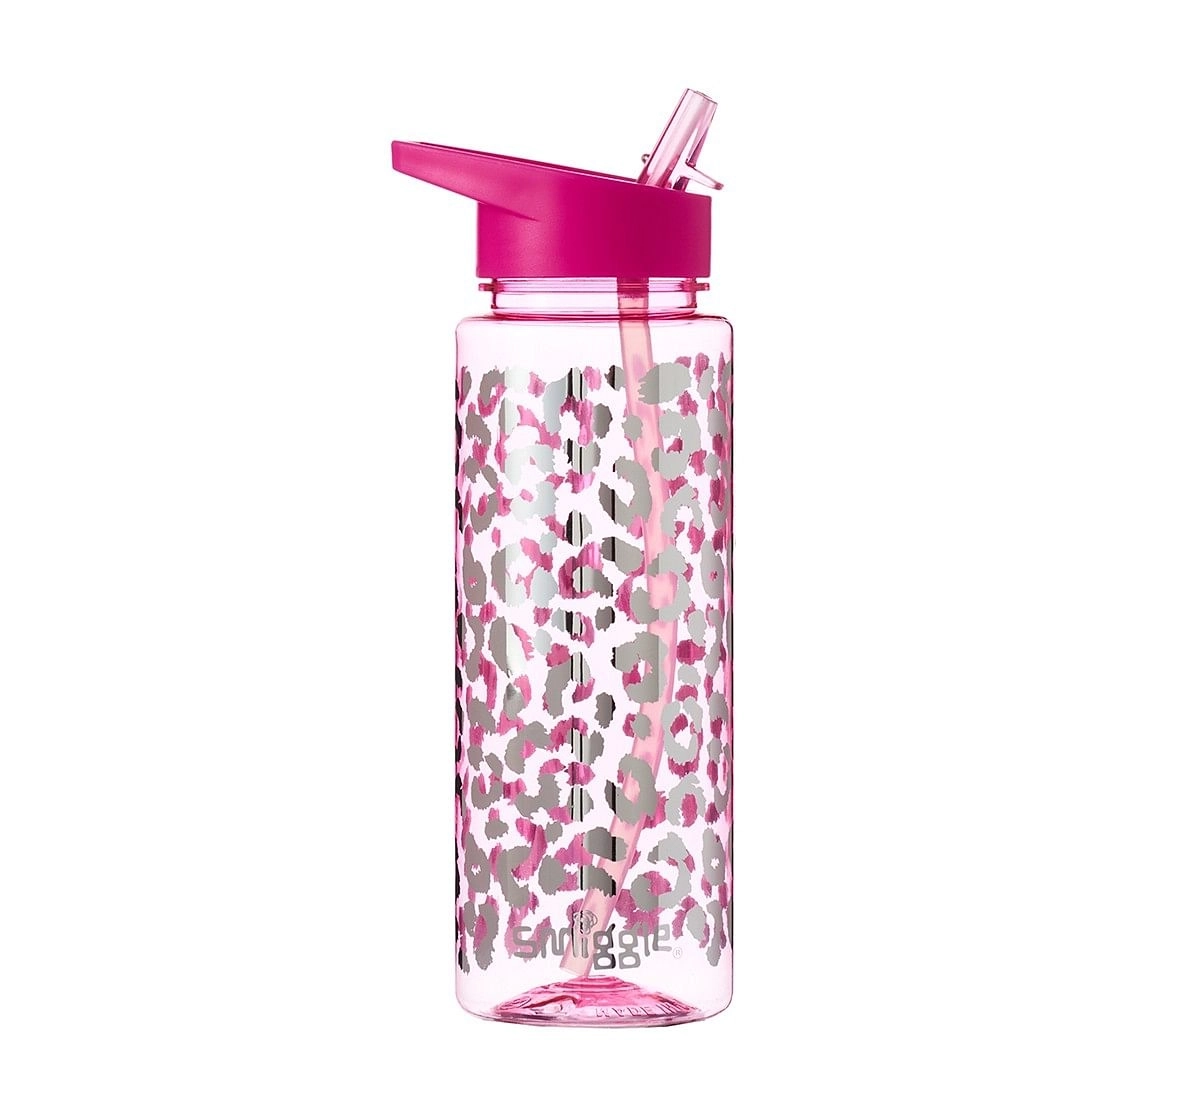 Smiggle Block Bottle with Flip Top Spout - Leopard Print Bags for Kids age 3Y+ (Pink)